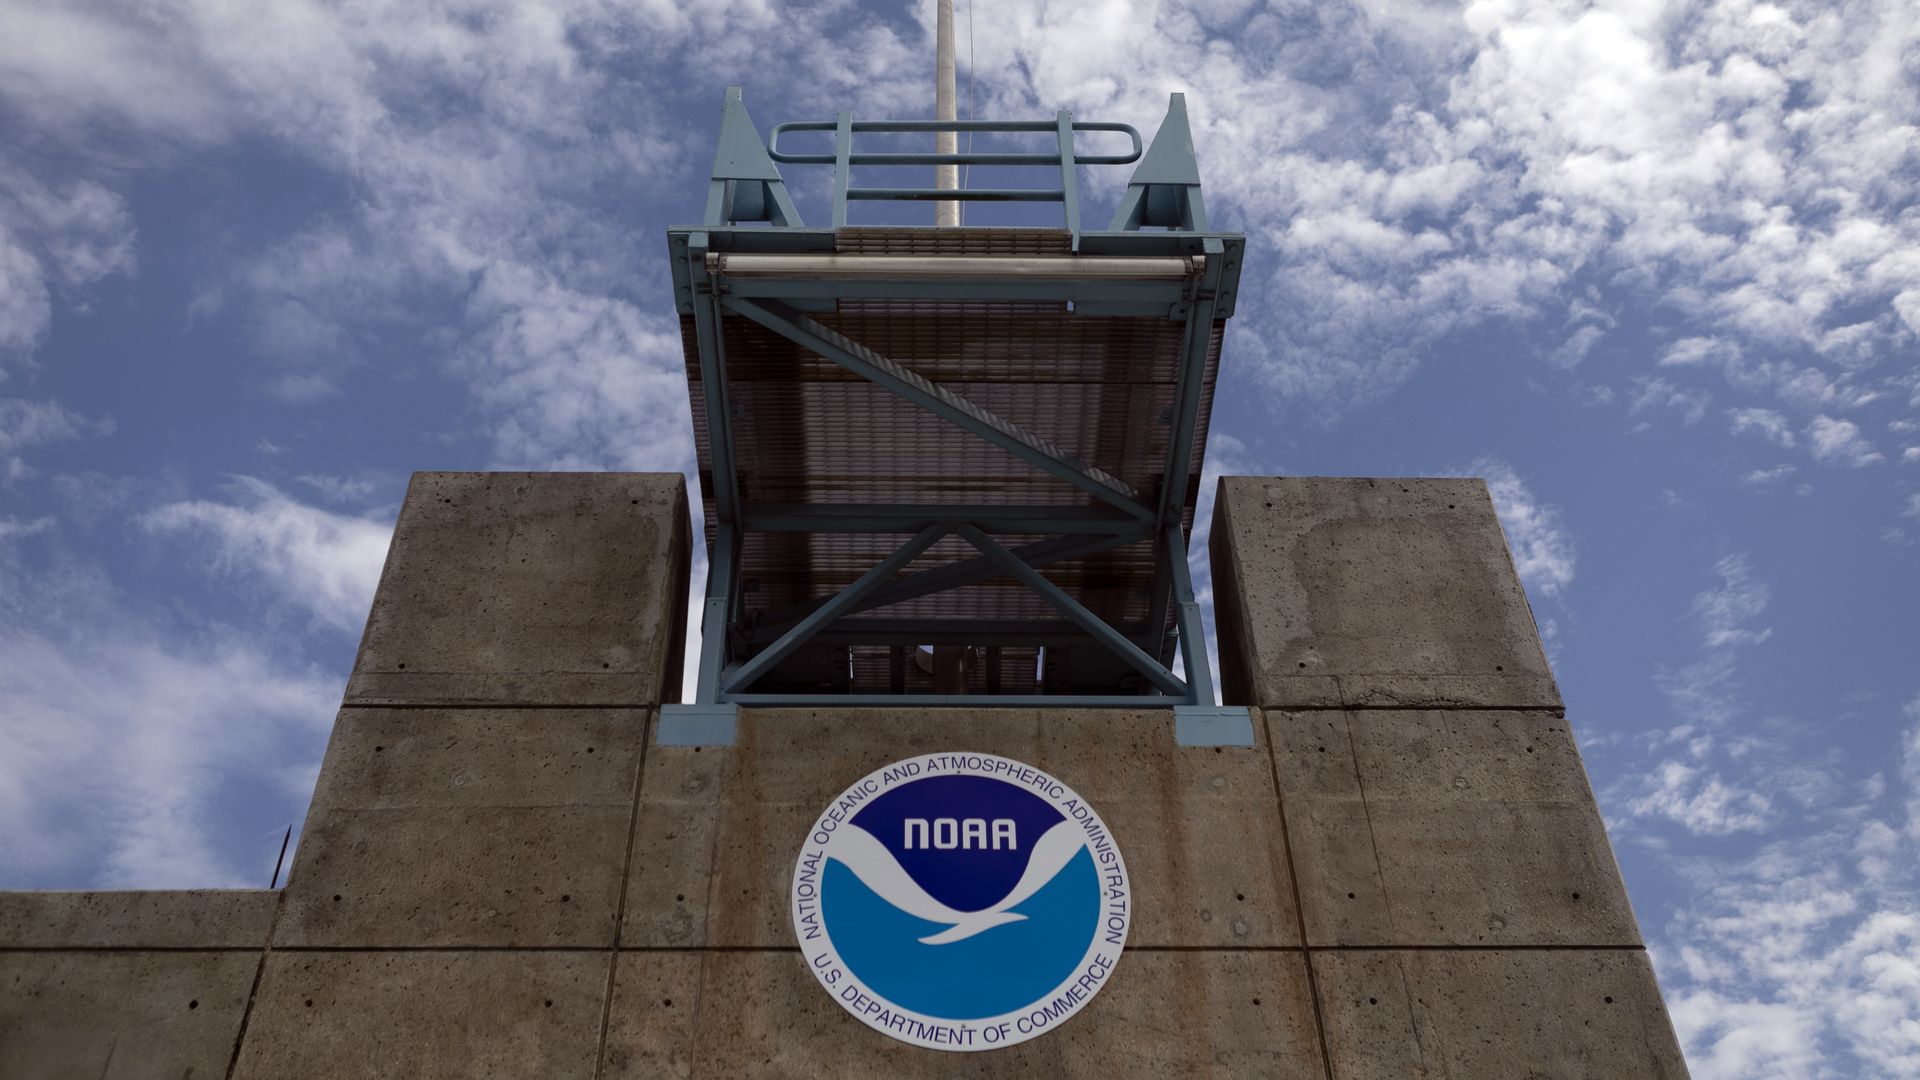 Photo of a tower with the NOAA symbol on it, taken at the National Hurricane Center in Miami.